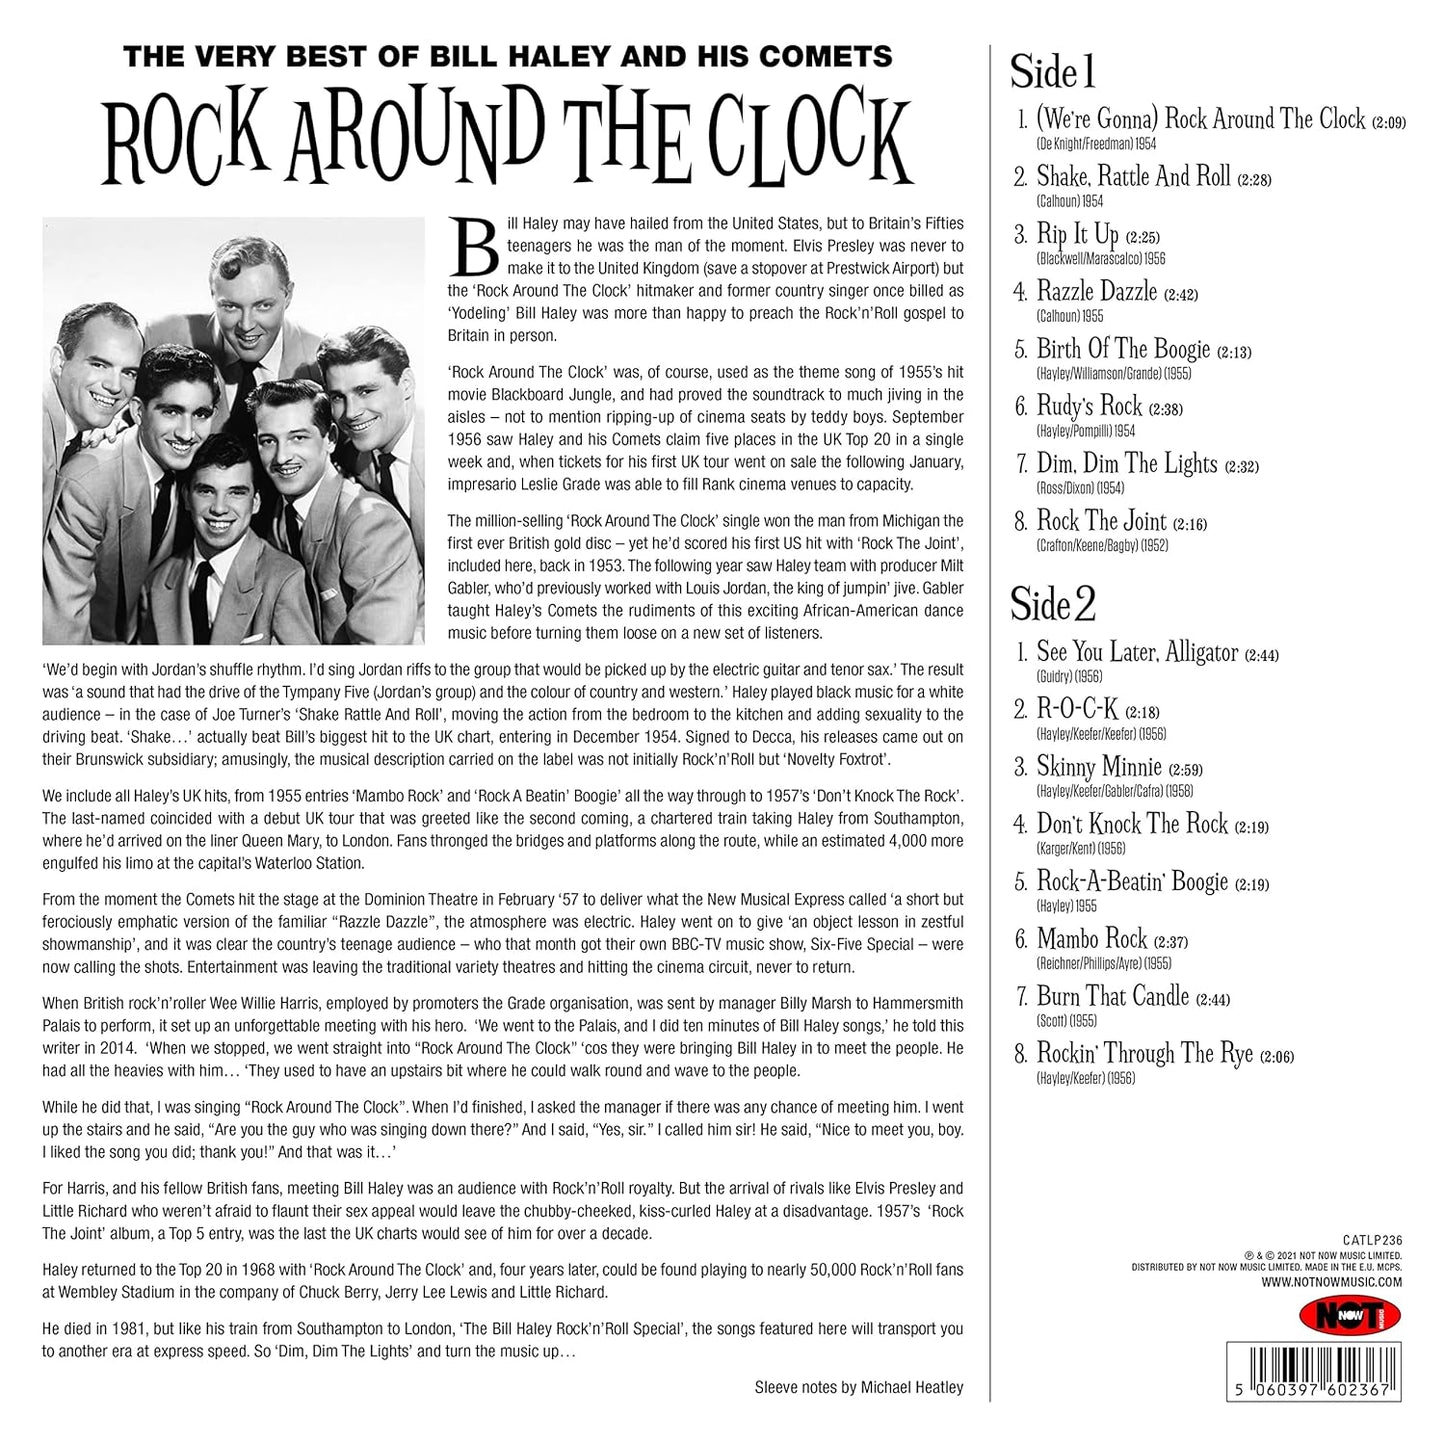 Bill Haley & His Comets - Rock Around The Clock: The Very Best Of (180 Gram Import) (LP)